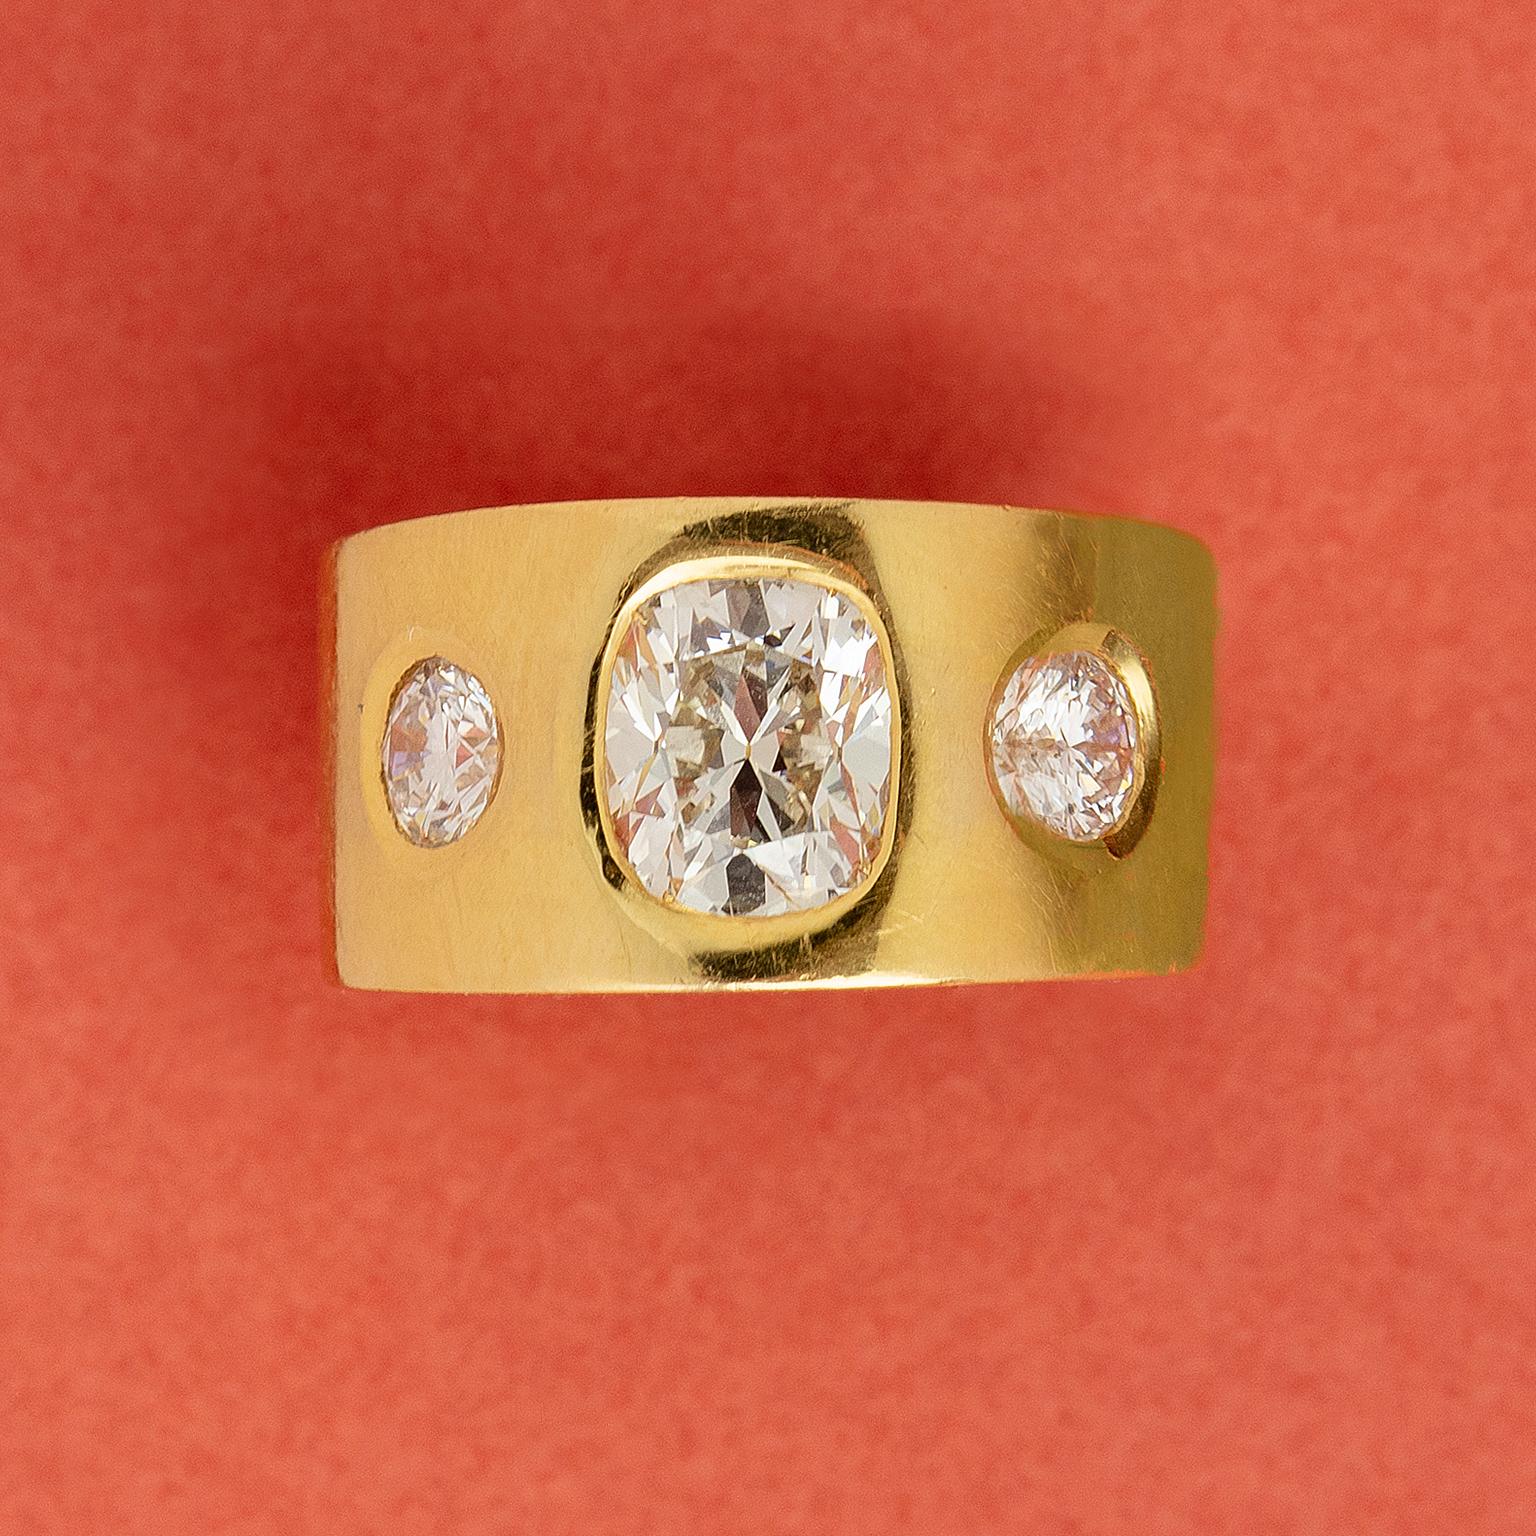 An 18-carat gold, bulky, three-stone band ring with sharp edges set with a large cushion-cut diamond (app. 2.6 carats, J, VS2) and two brilliant-cut diamonds (each app. 0.50 carat, F-G, VS2-SI1) all in a flush setting. 
weight: 19.46 grams
size: